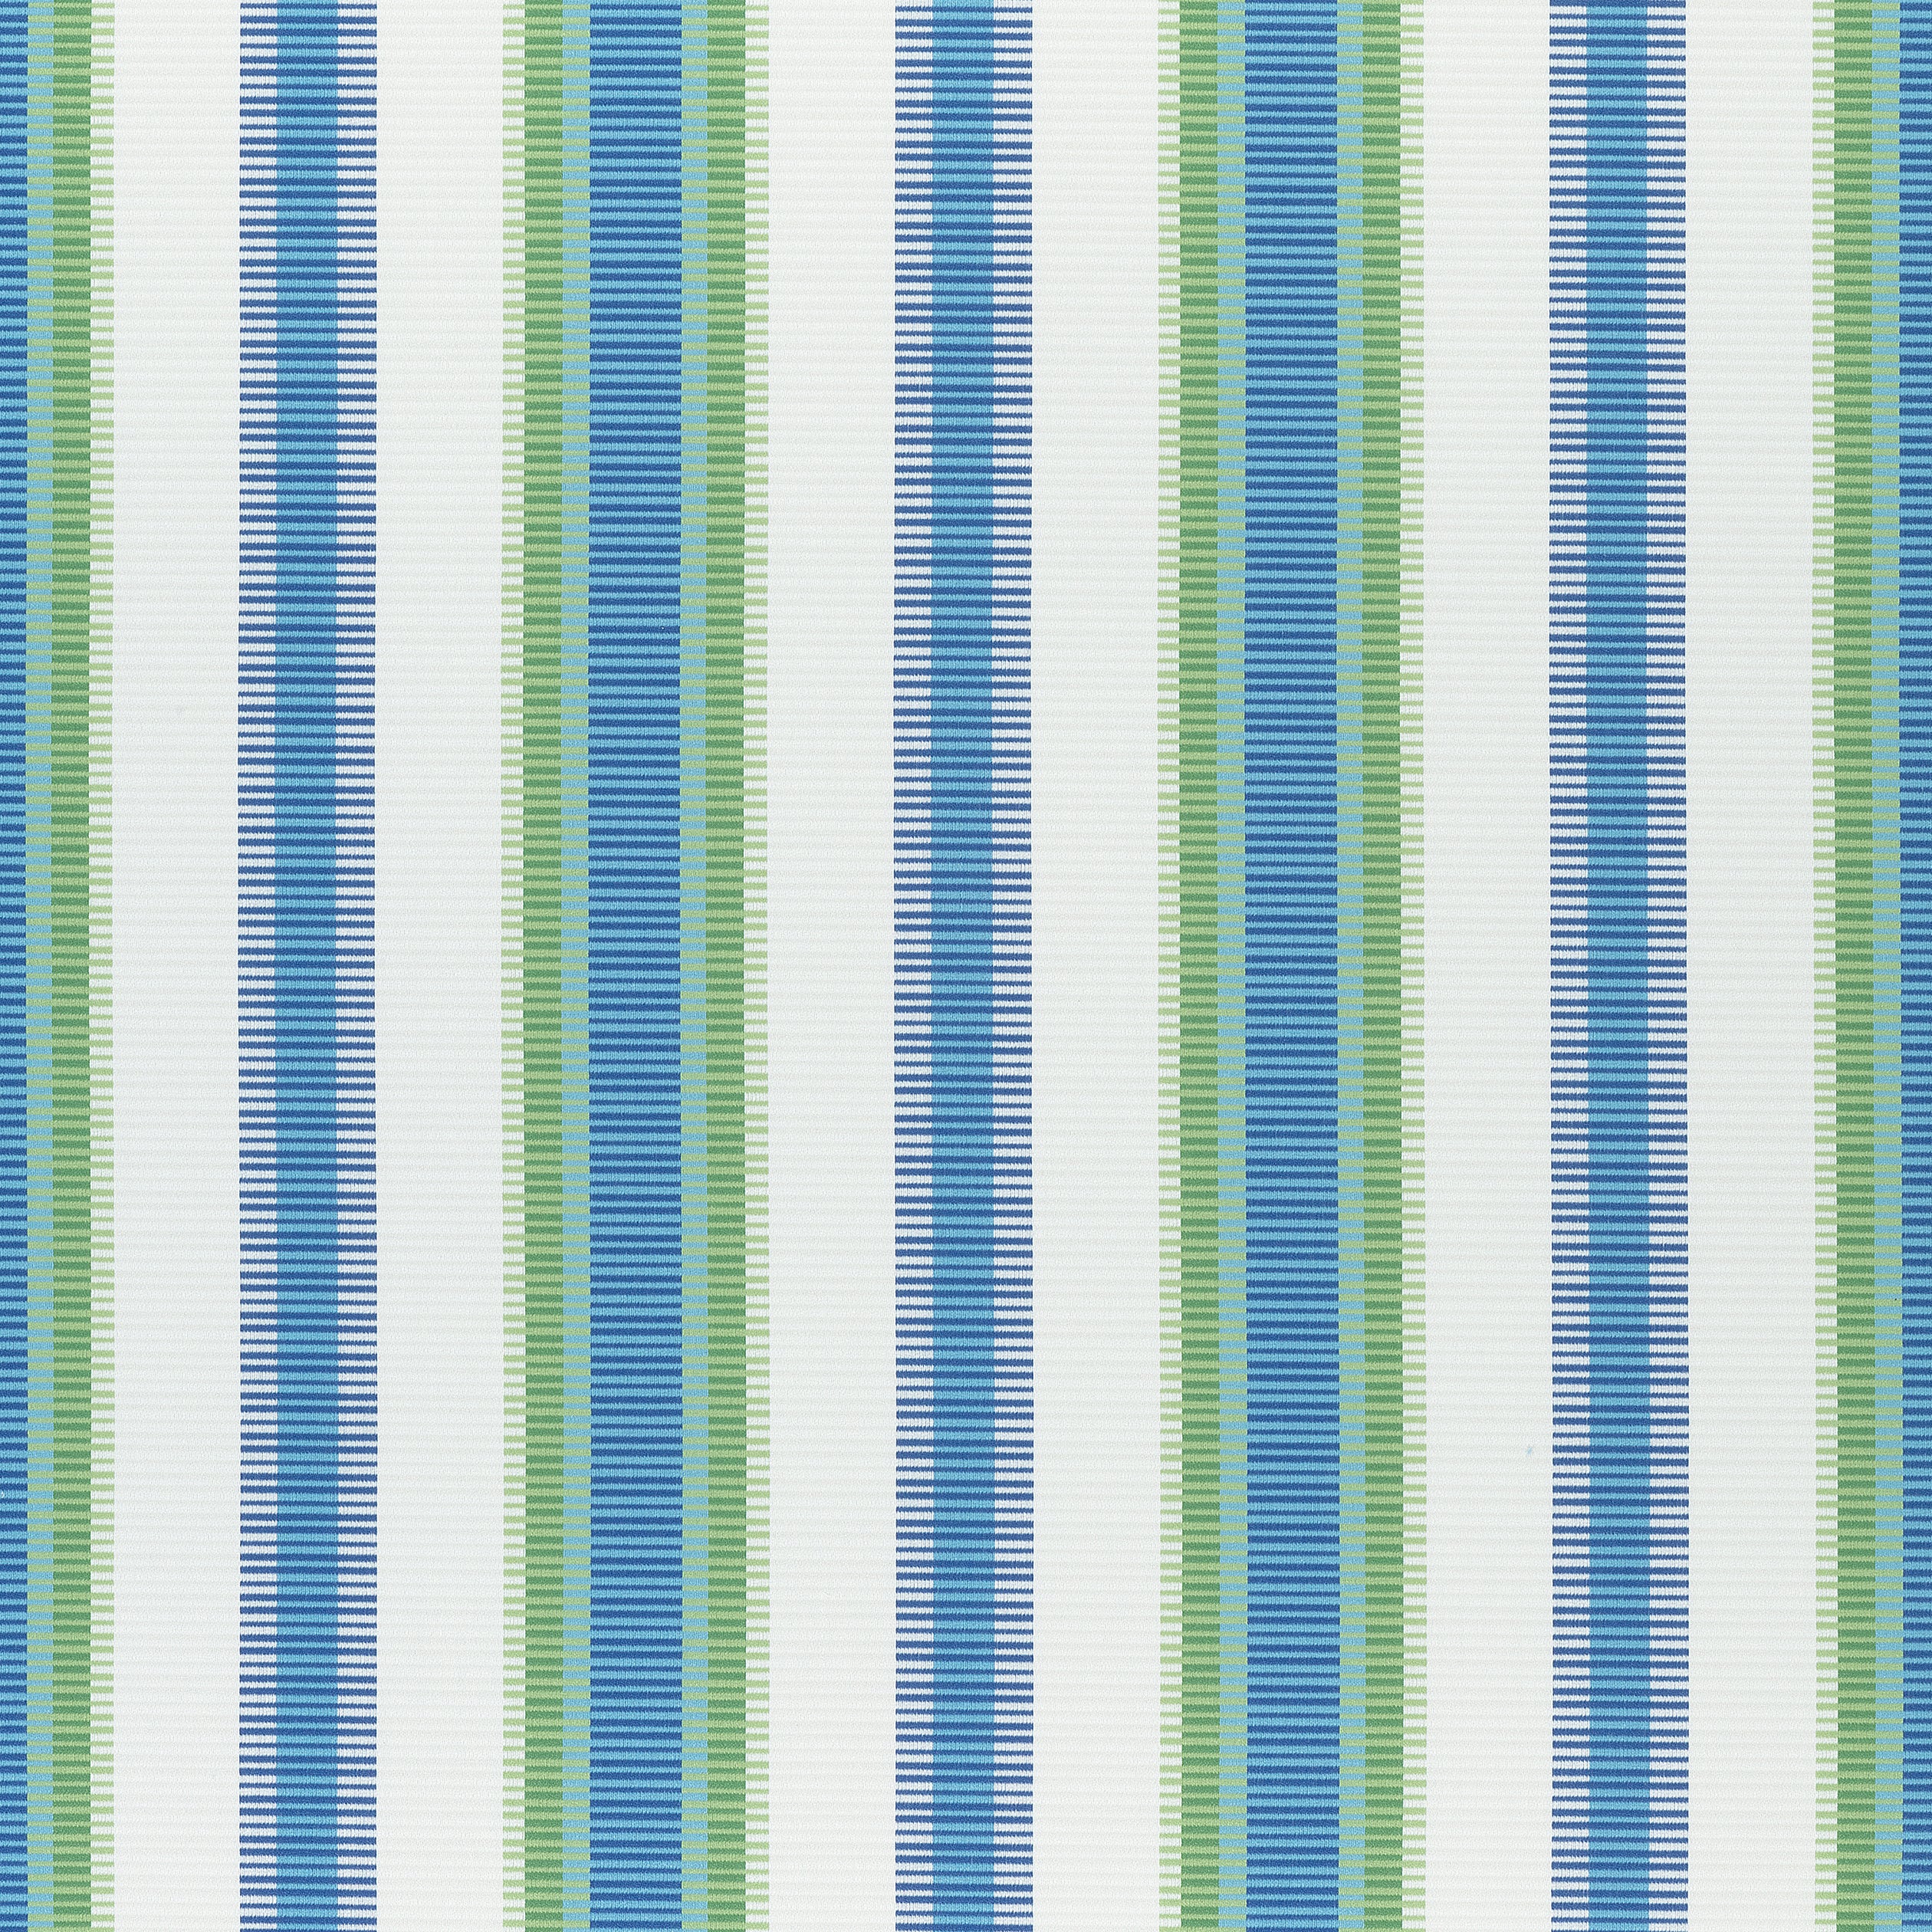 Samba Stripe fabric in royal blue and green color - pattern number W74670 - by Thibaut in the Festival collection